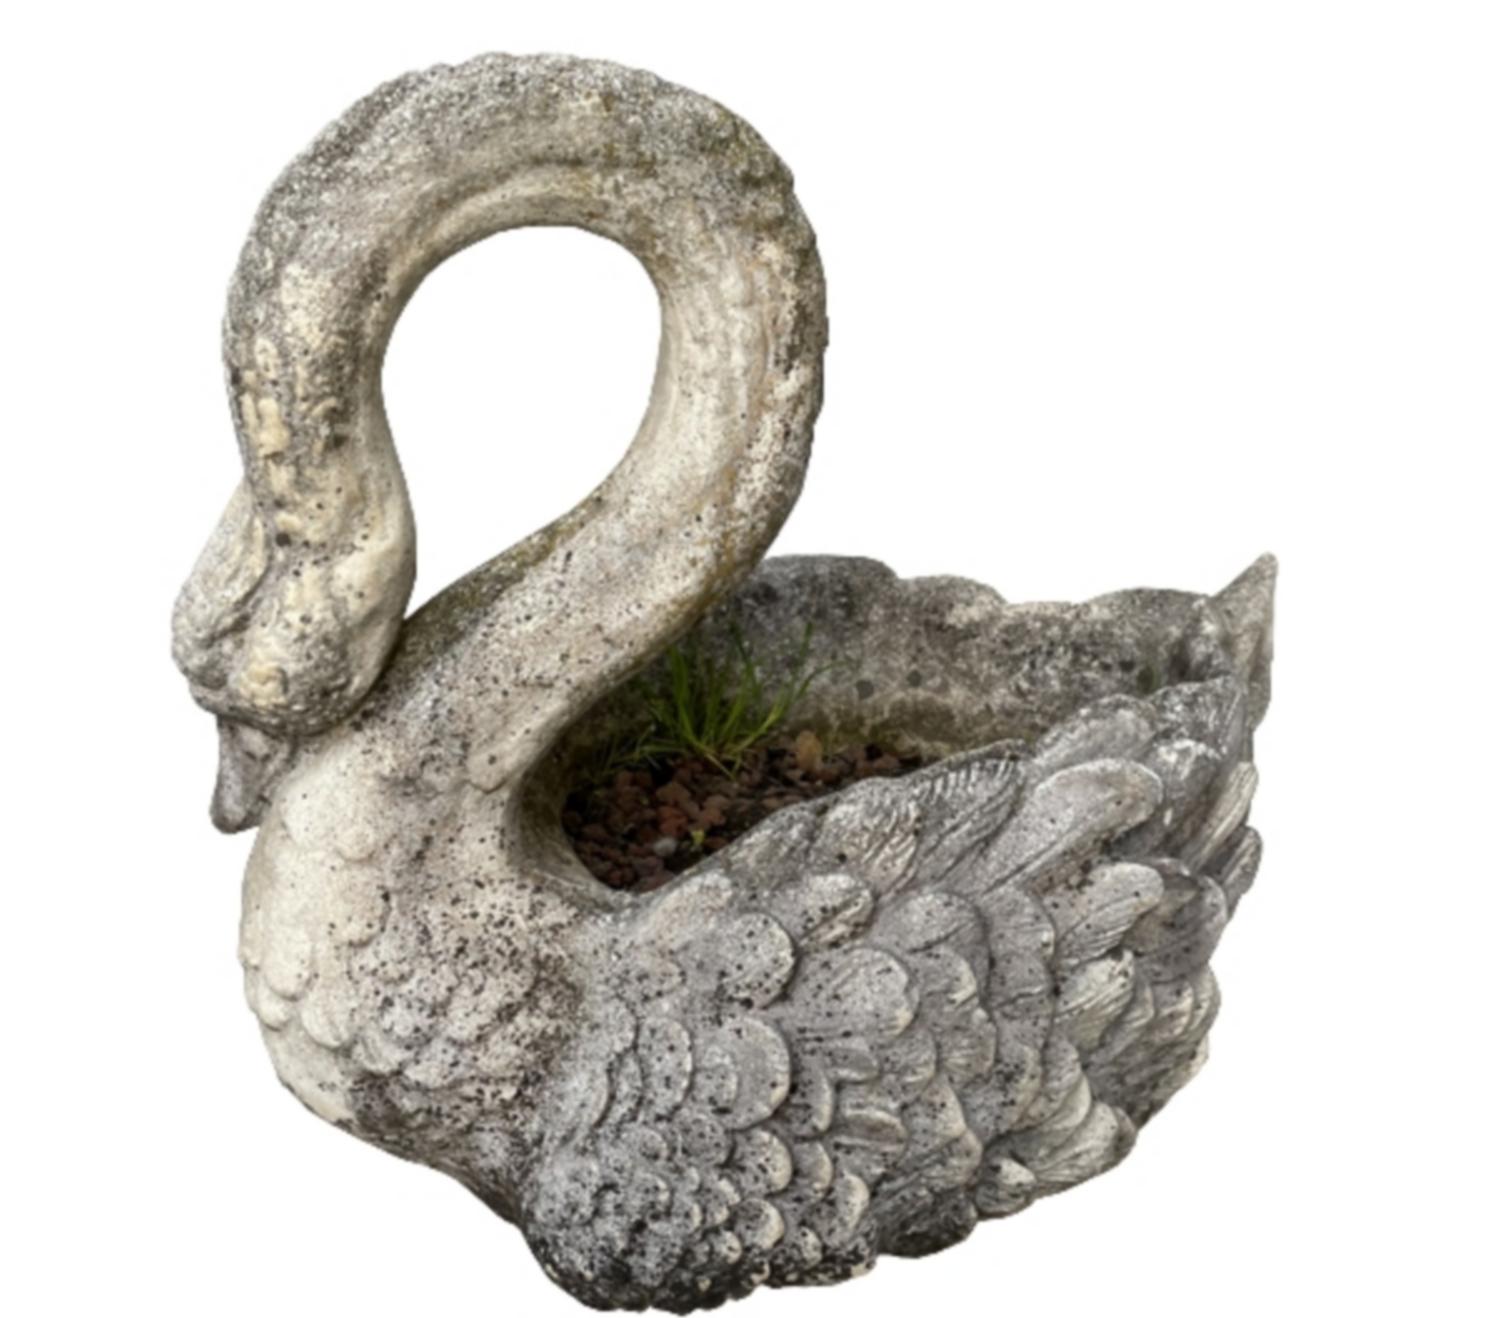 Pair of large cement planters in the shape of swans, with their original patina.
France around 1950.